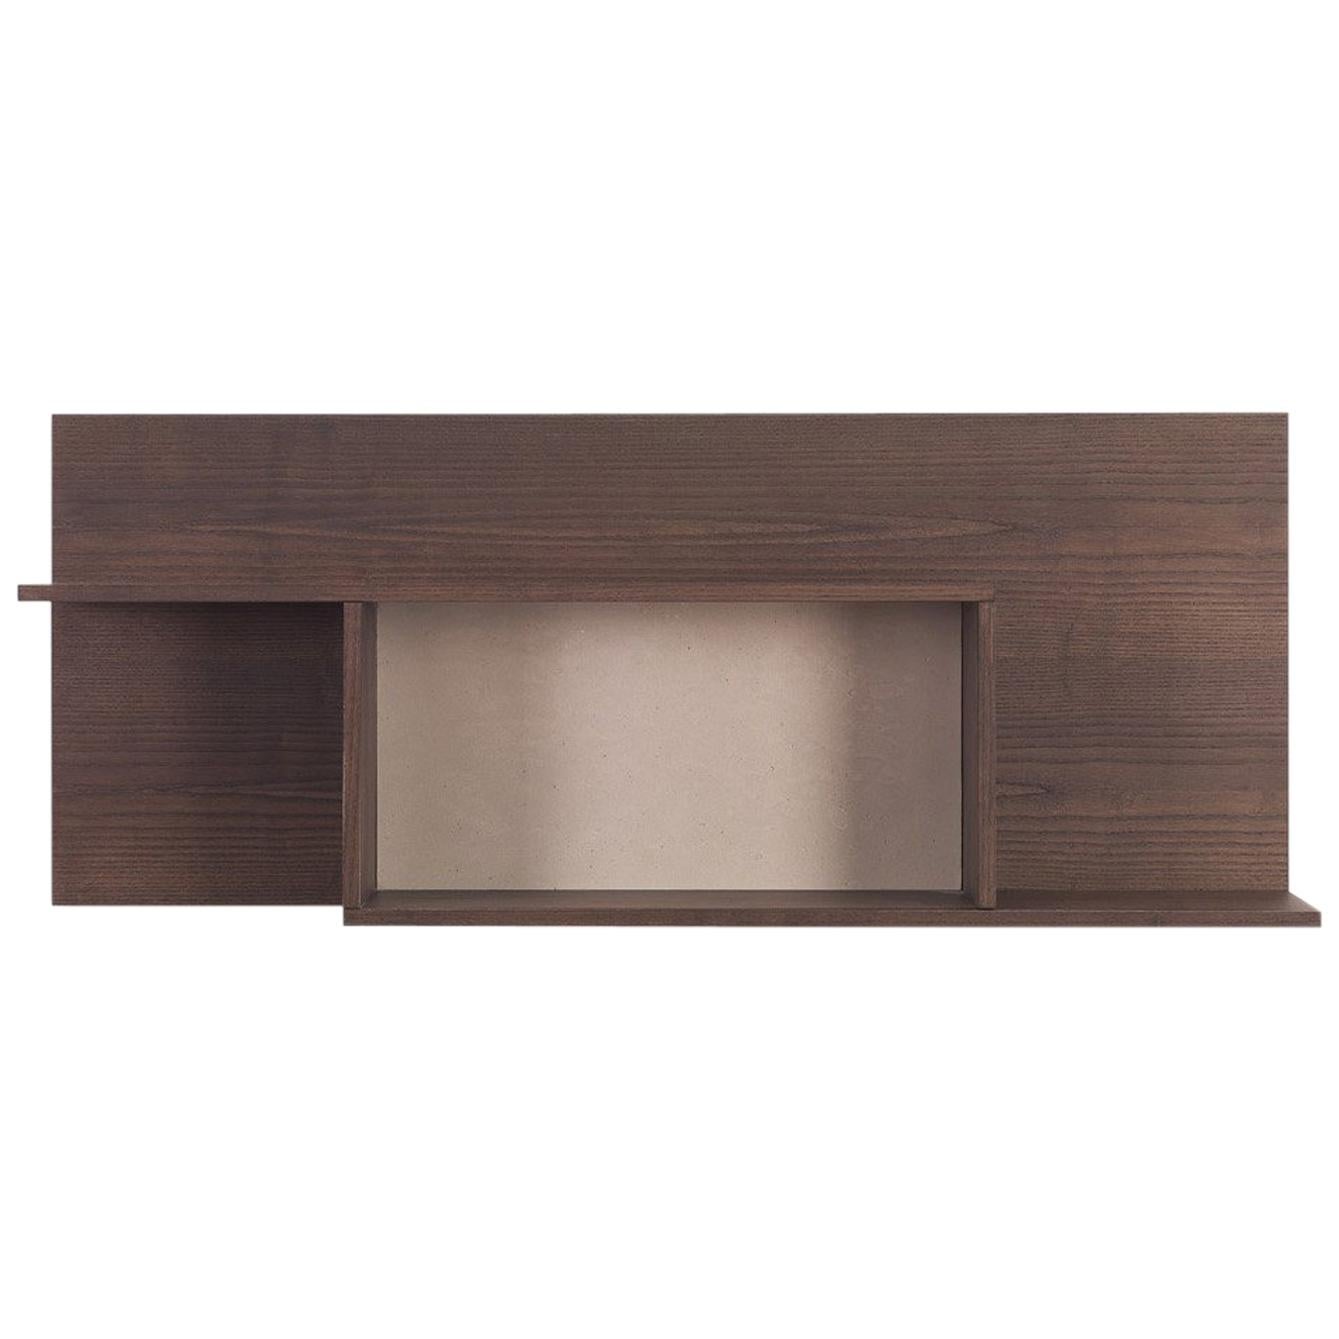 Pacini & Cappellini Bunch Shelves in Ash by Giuliano & Gabriele Cappellettii For Sale